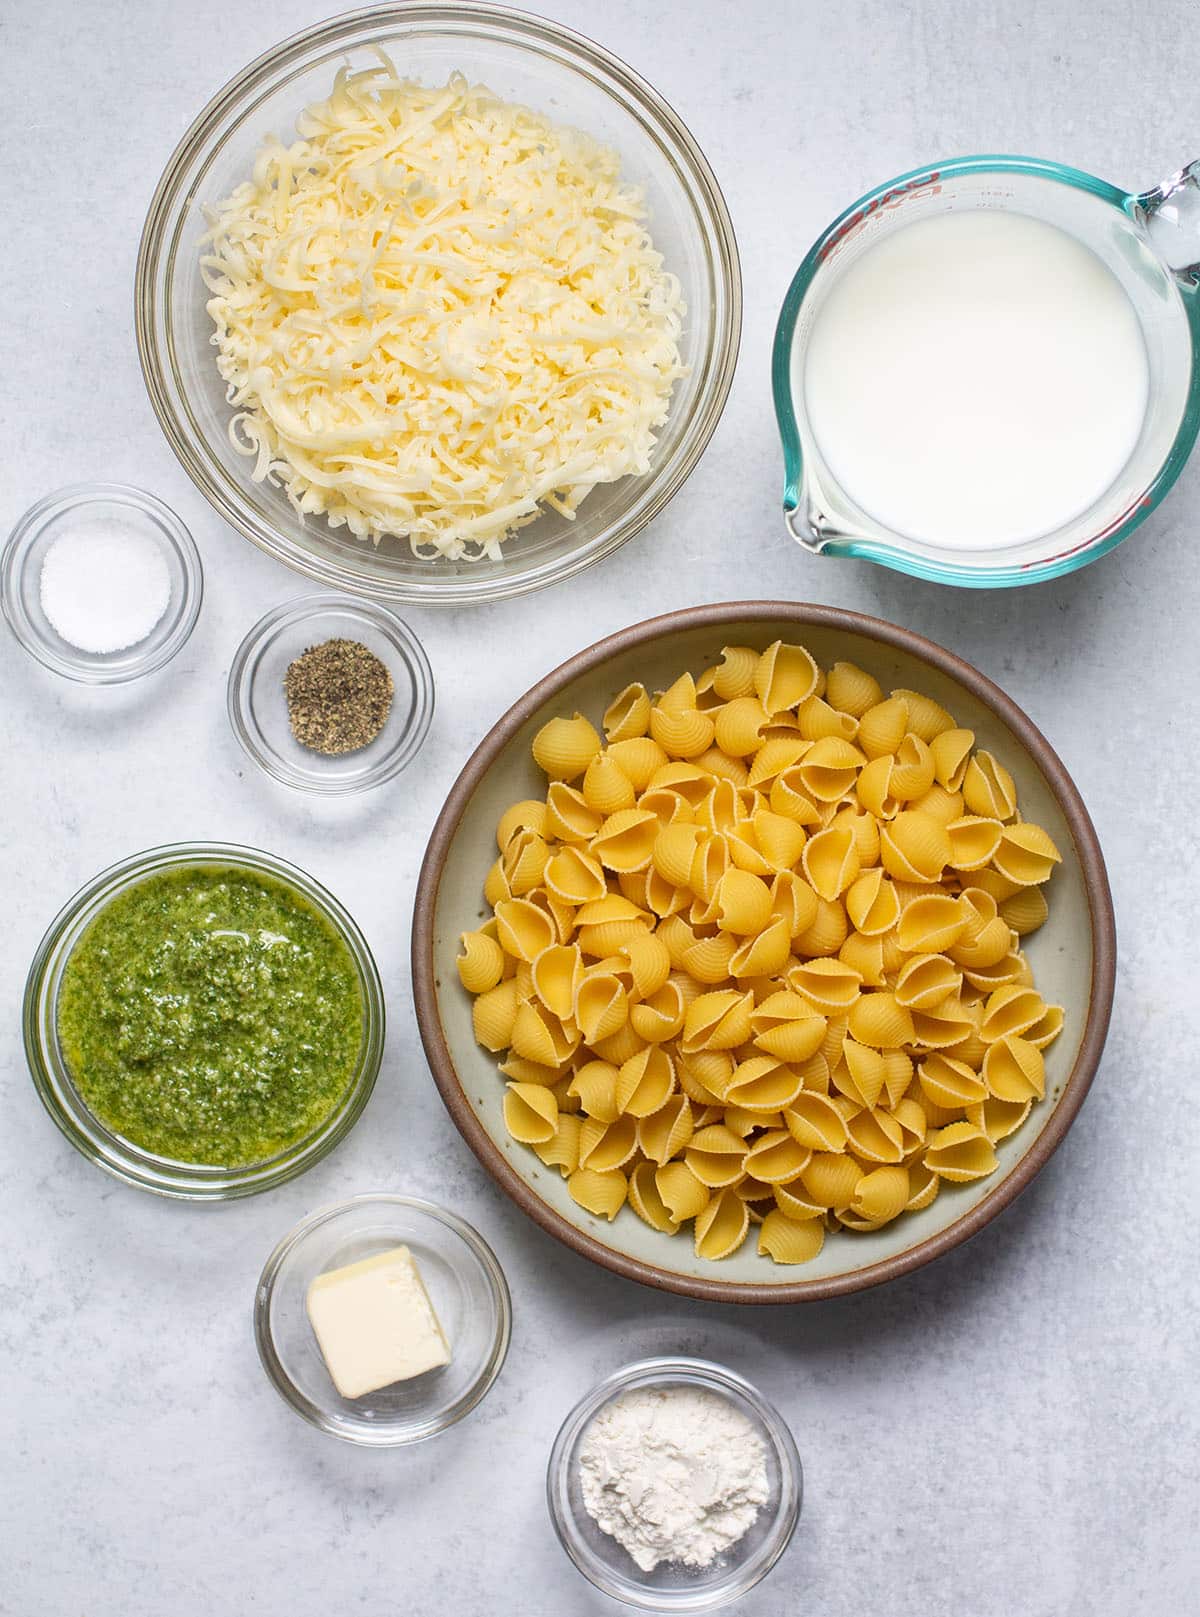 Mac and cheese ingredients, organized into individual bowls on a white table.